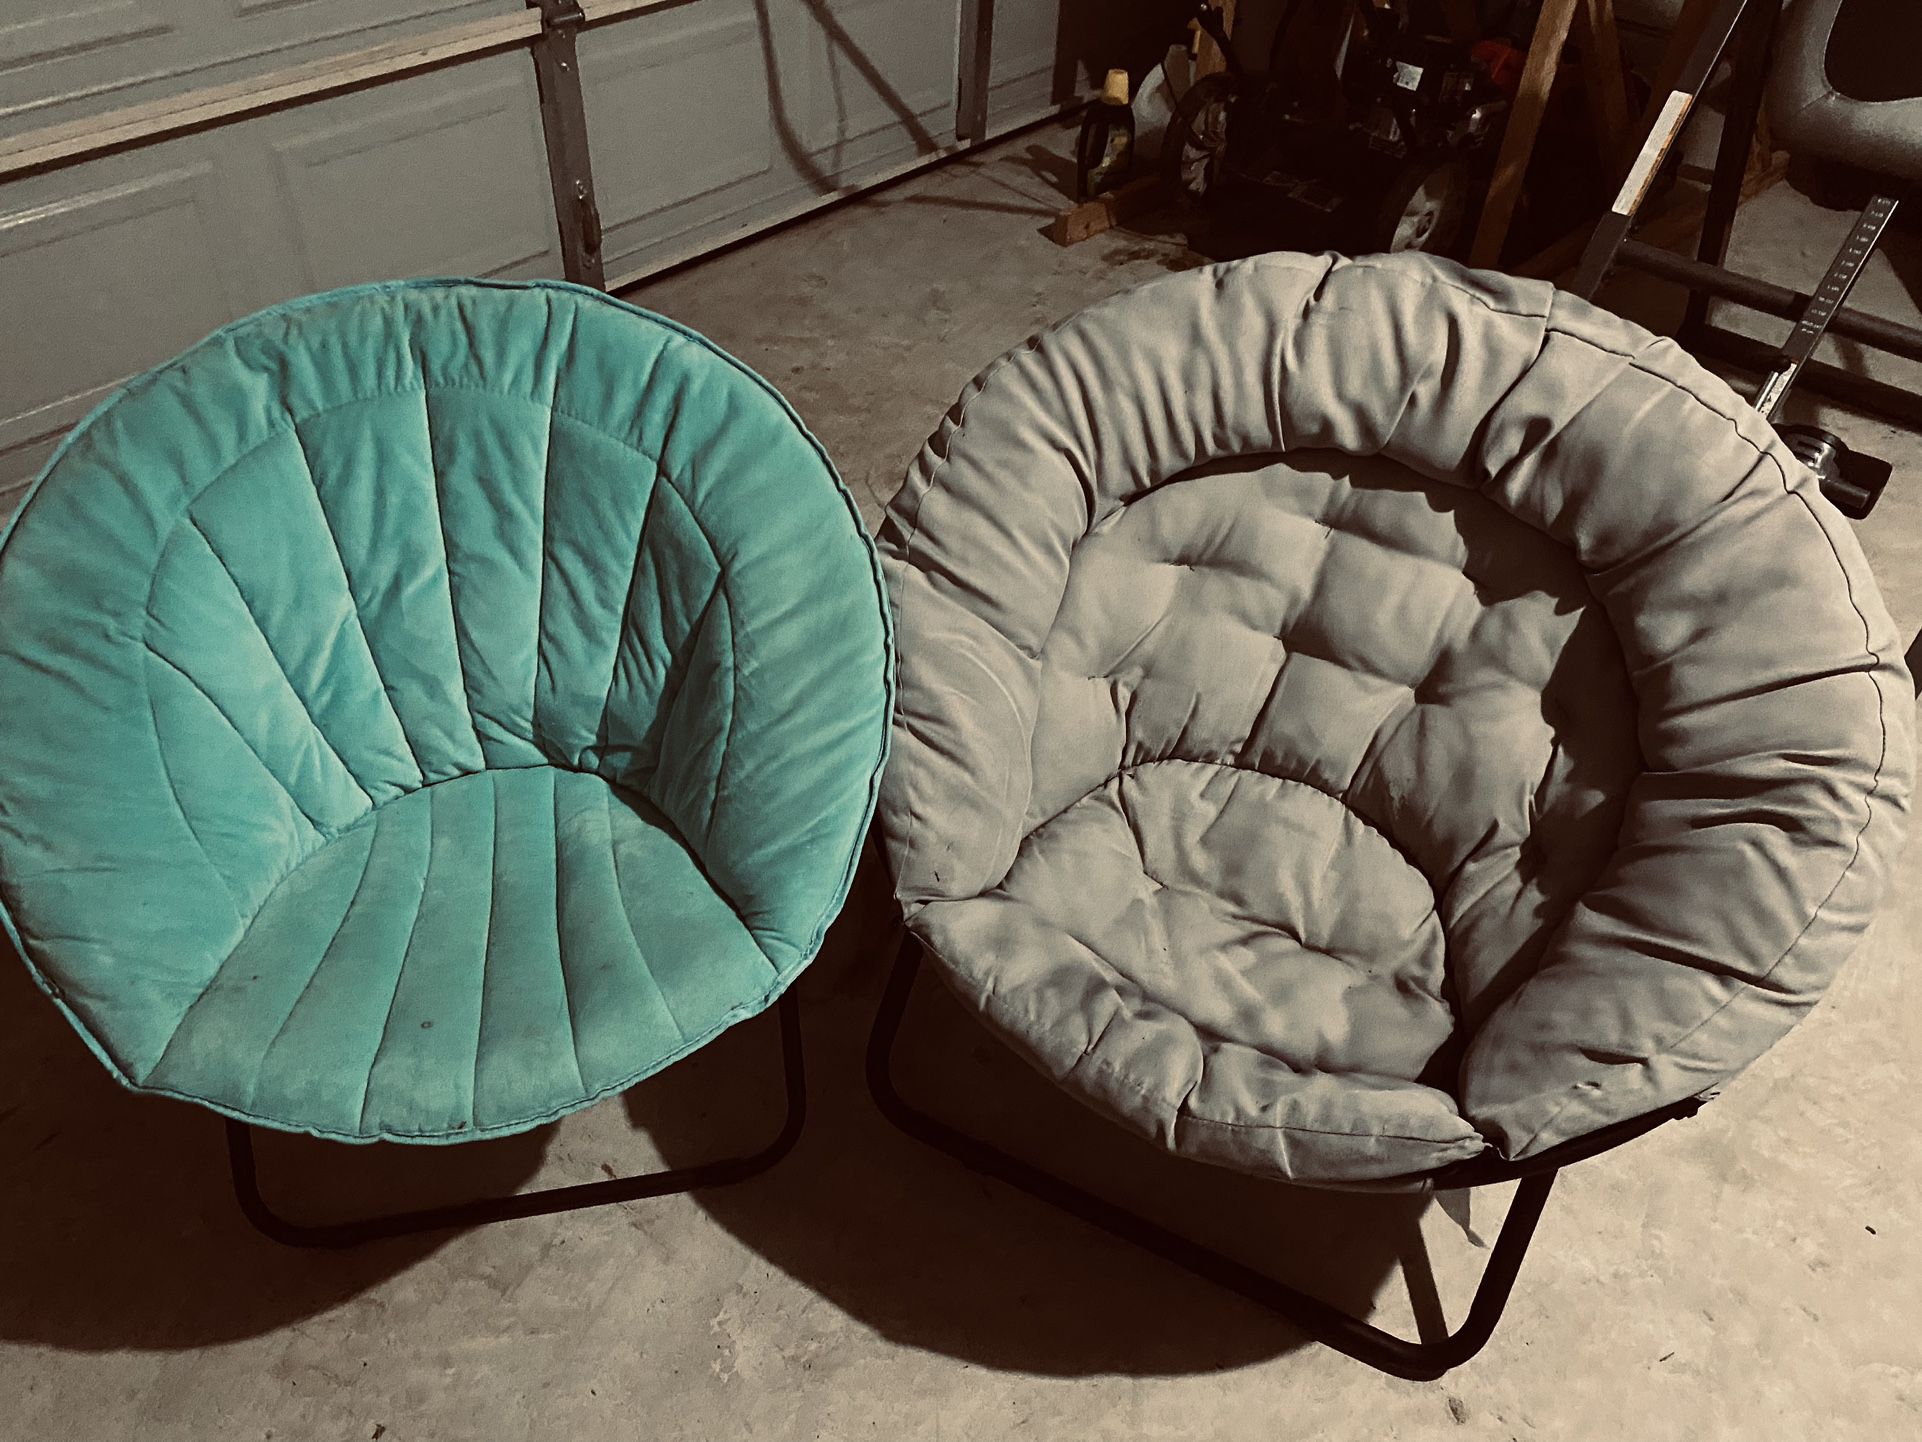 Comfy Fold Chairs! Buy One Or Both! 1 Is $15 Bucks ! Both Chairs Go For $27! Prices Are Negotiable!!!!